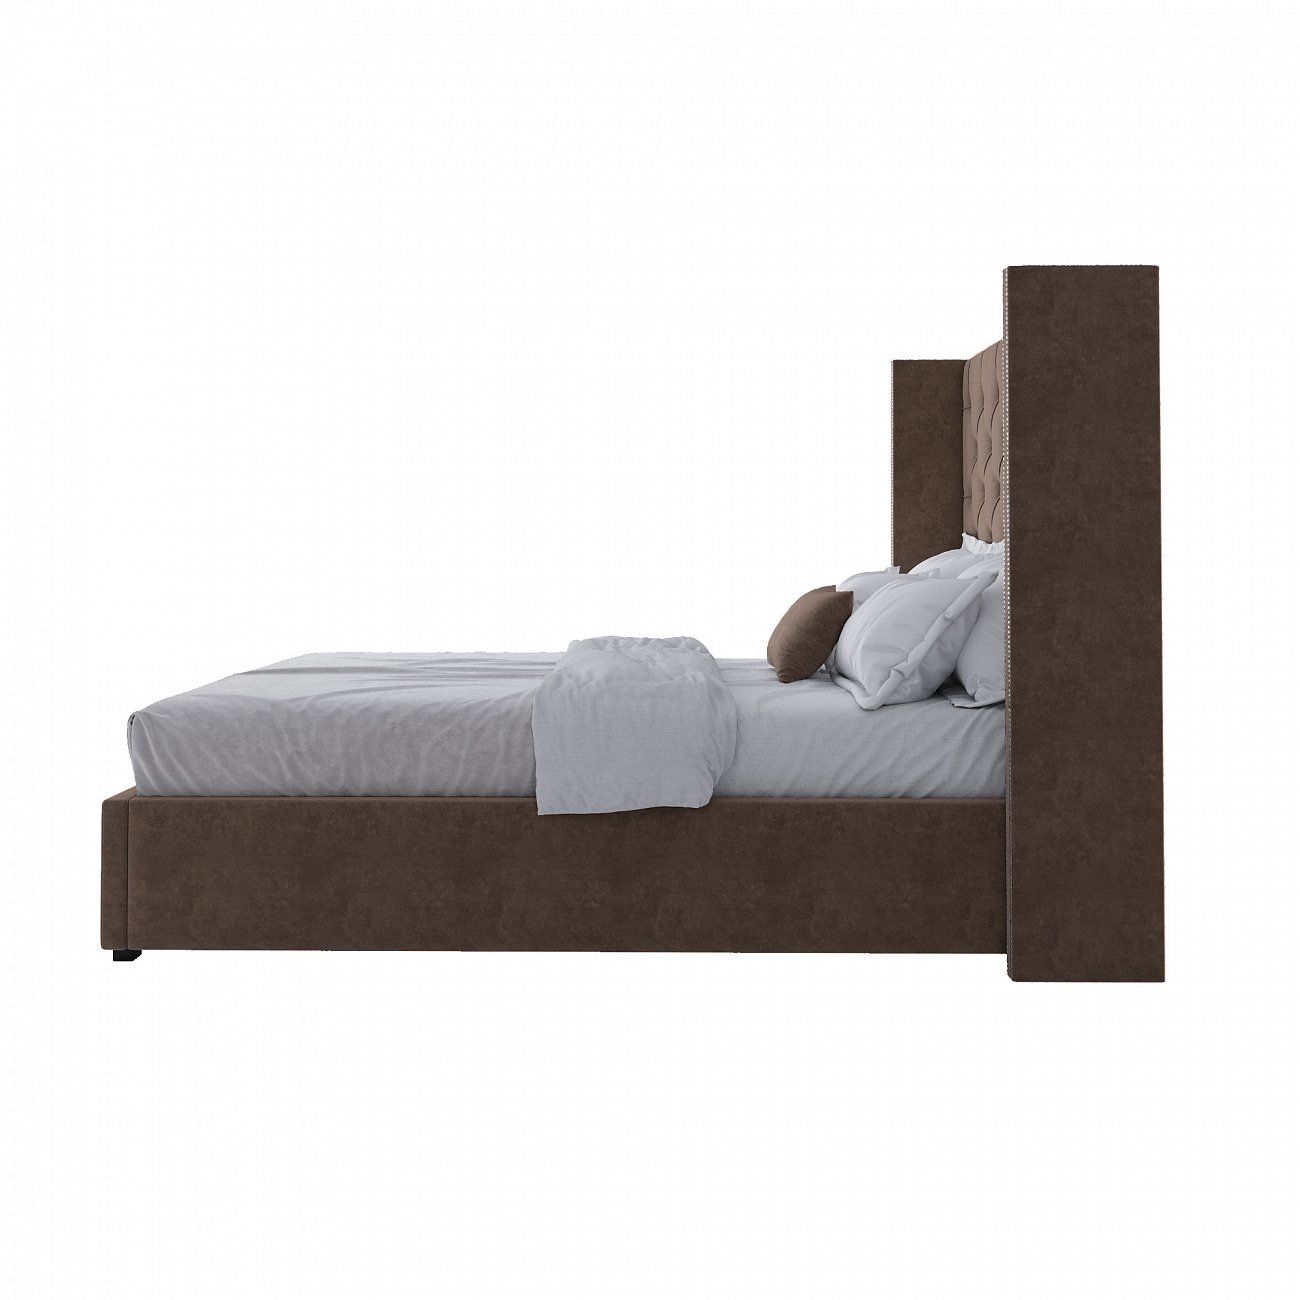 Teenage bed 140x200 cm brown with carnations Wing